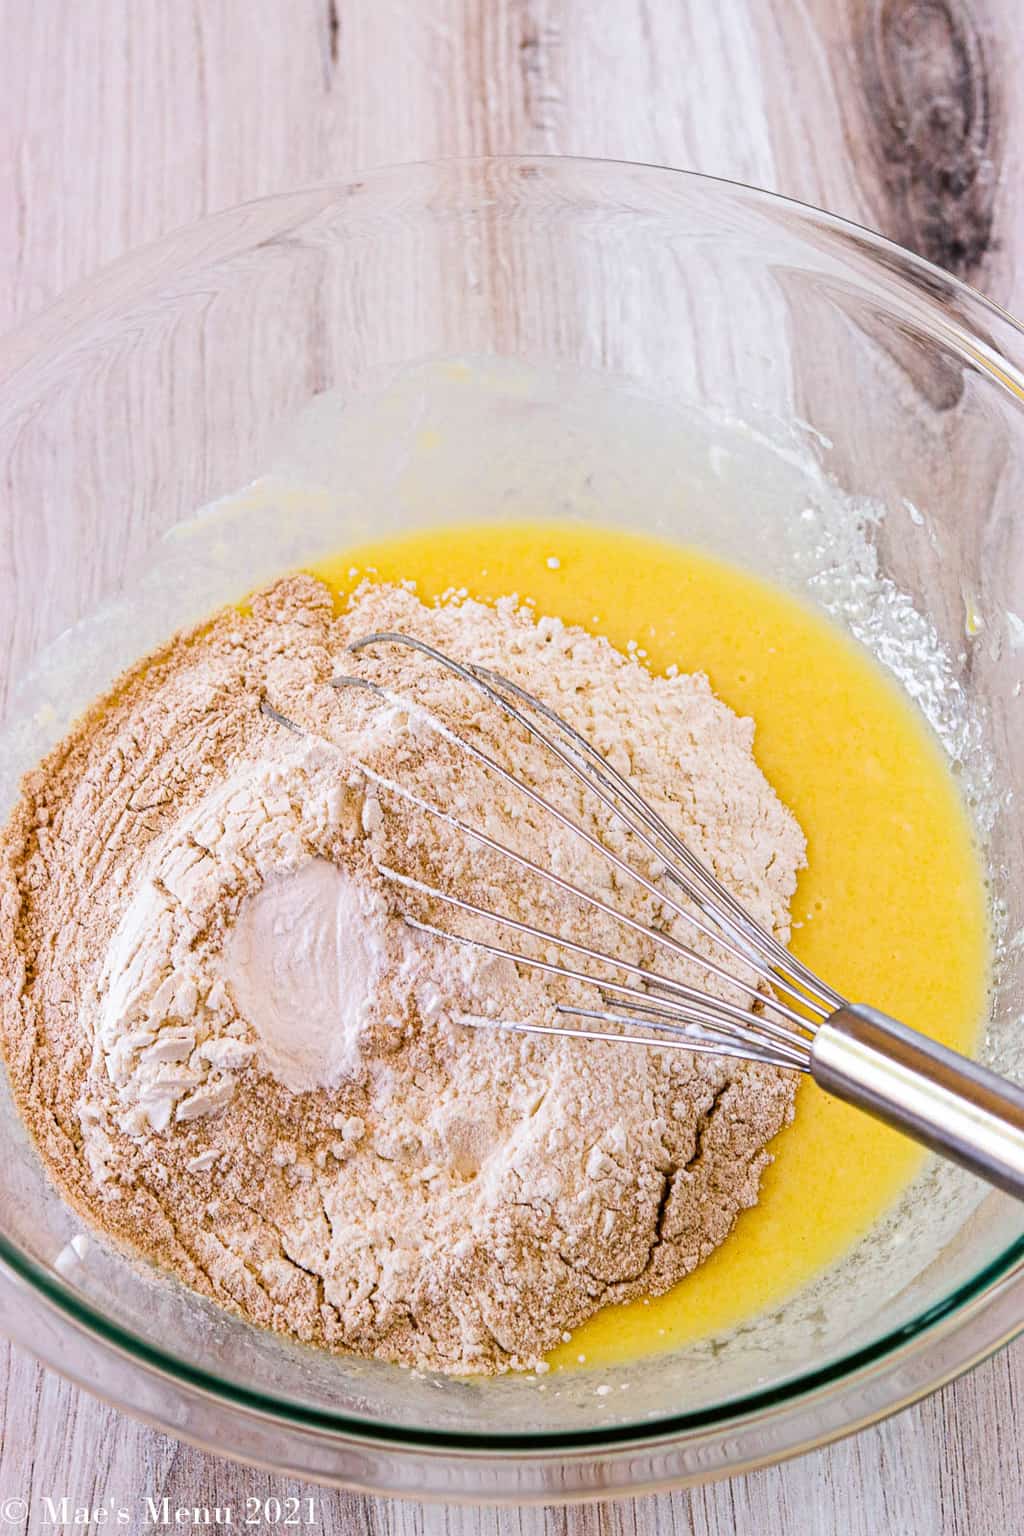 A mizing bowl with flour added to the egg mixture